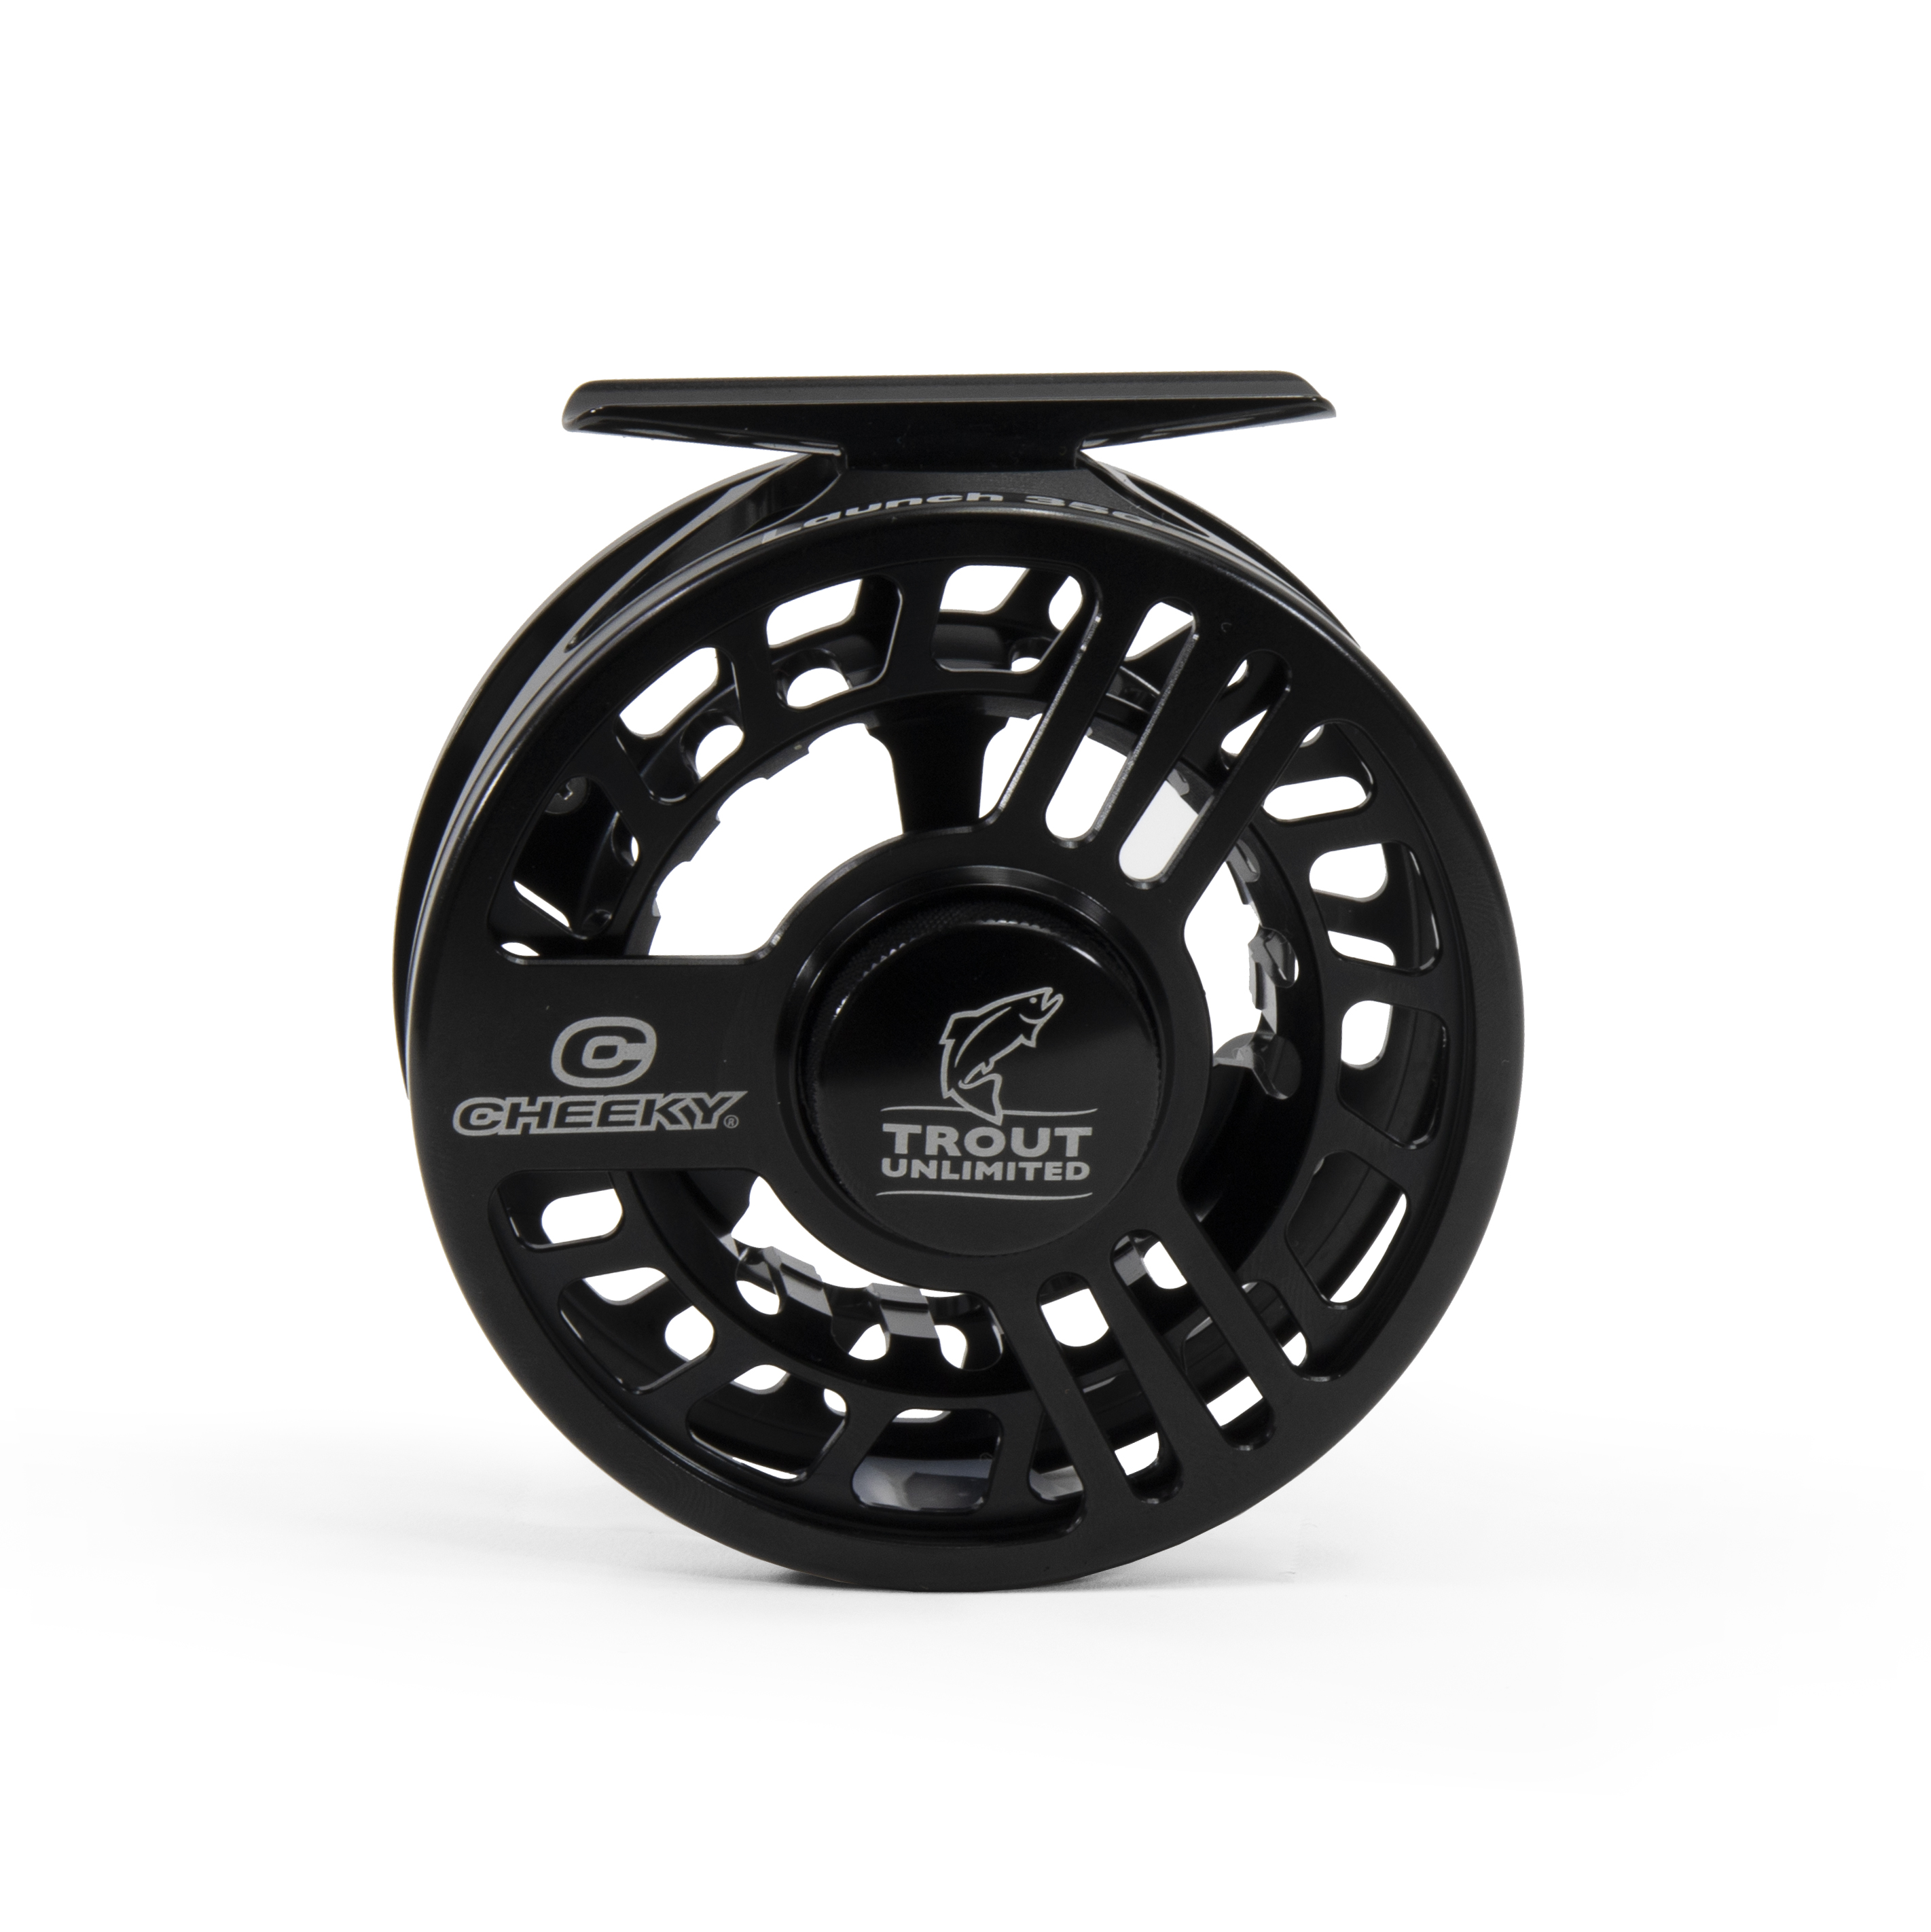 cheeky CHEEKY Limited Edition TROUT UNLIMITED Launch 350 Reel Bundle